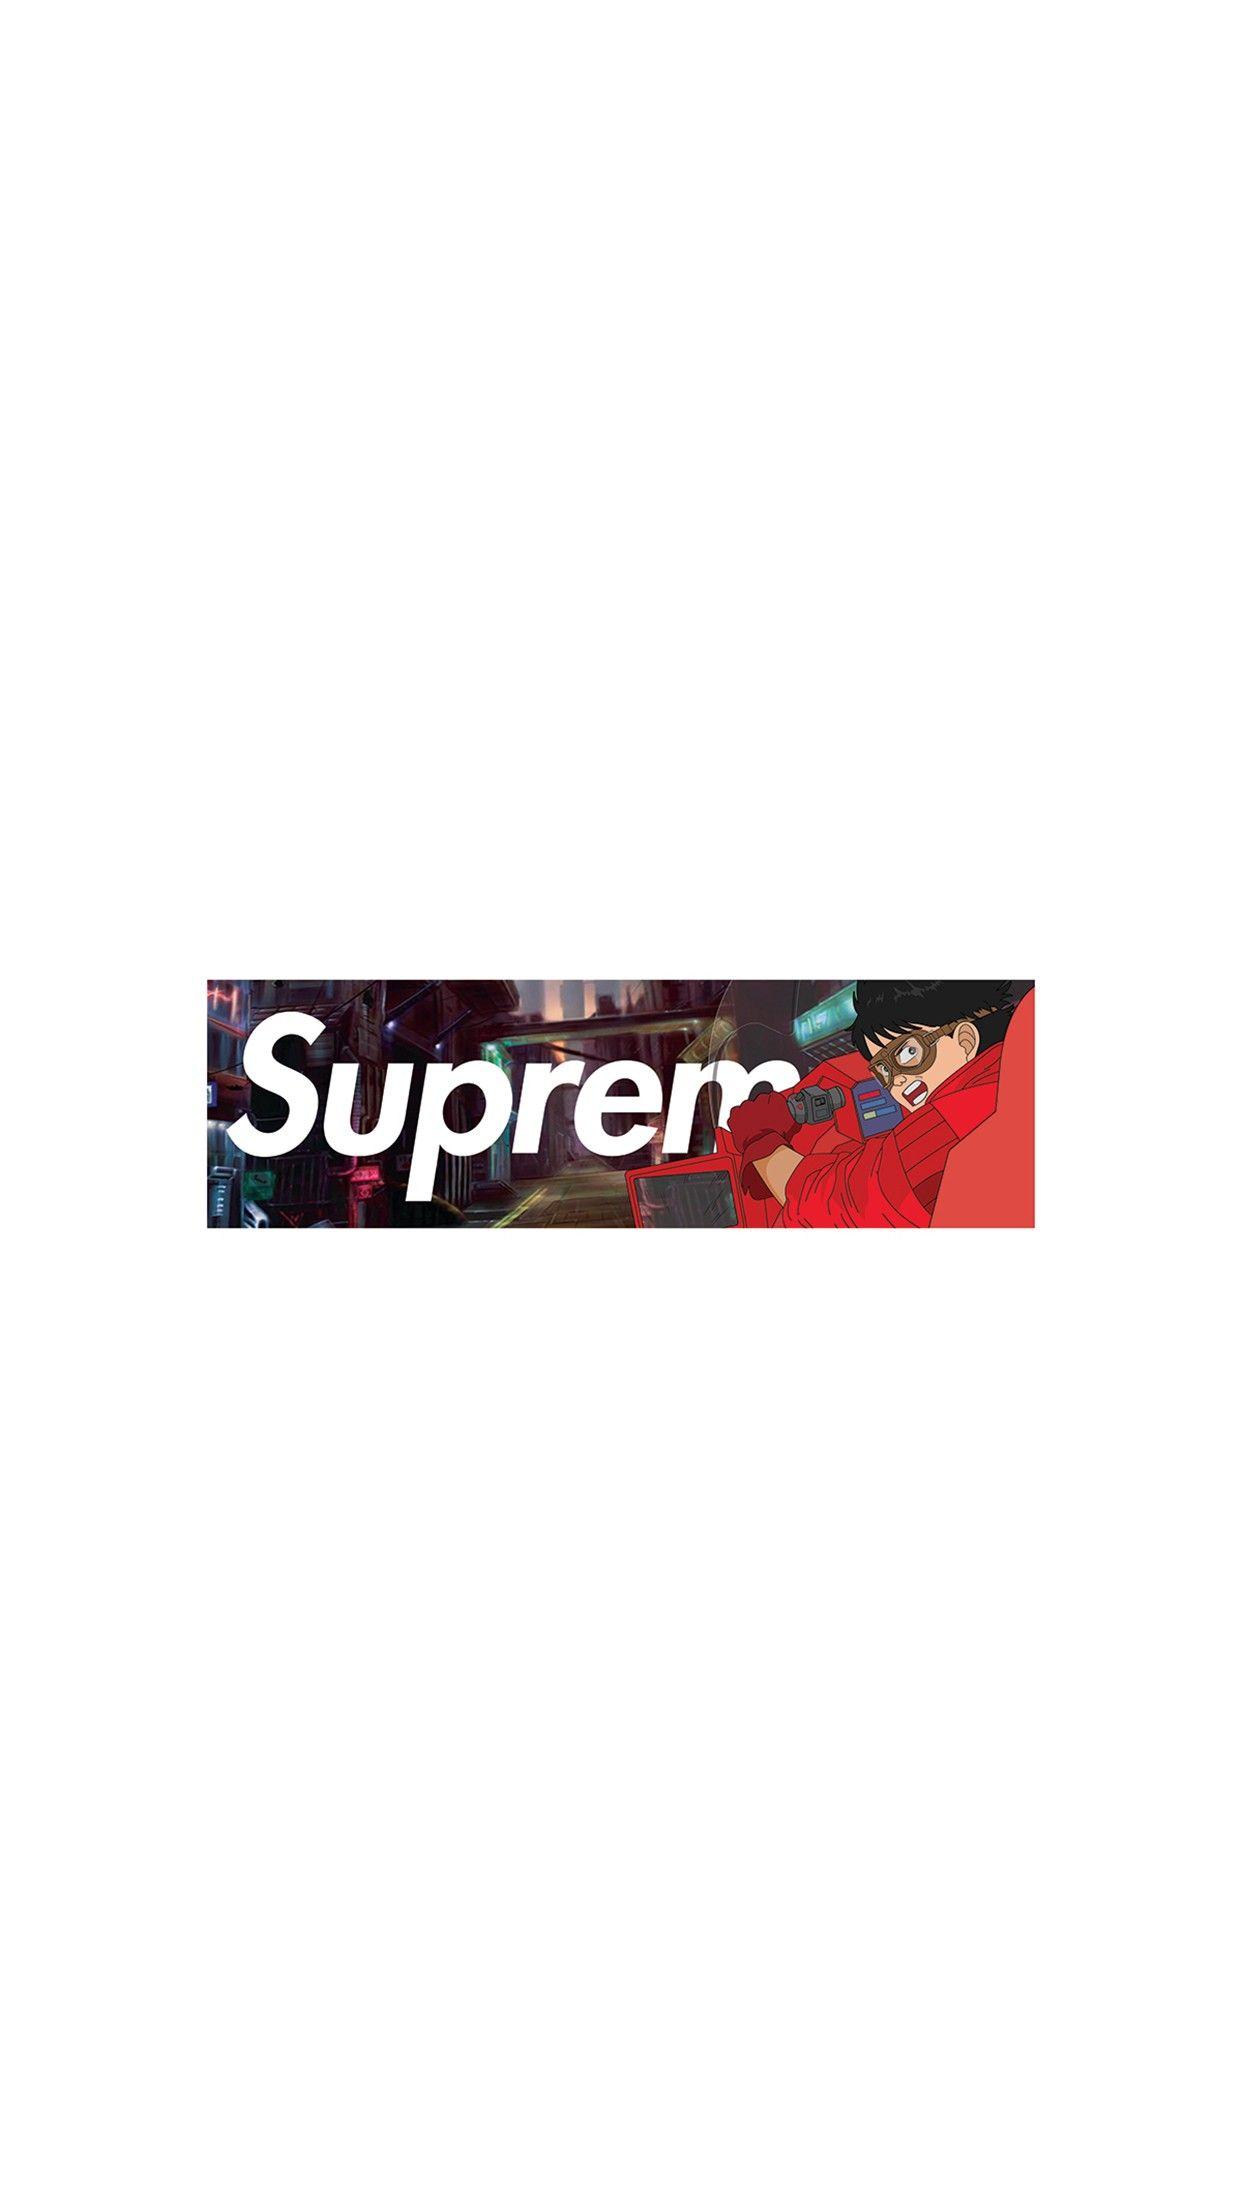 Supreme White Iphone Wallpapers Top Free Supreme White Iphone